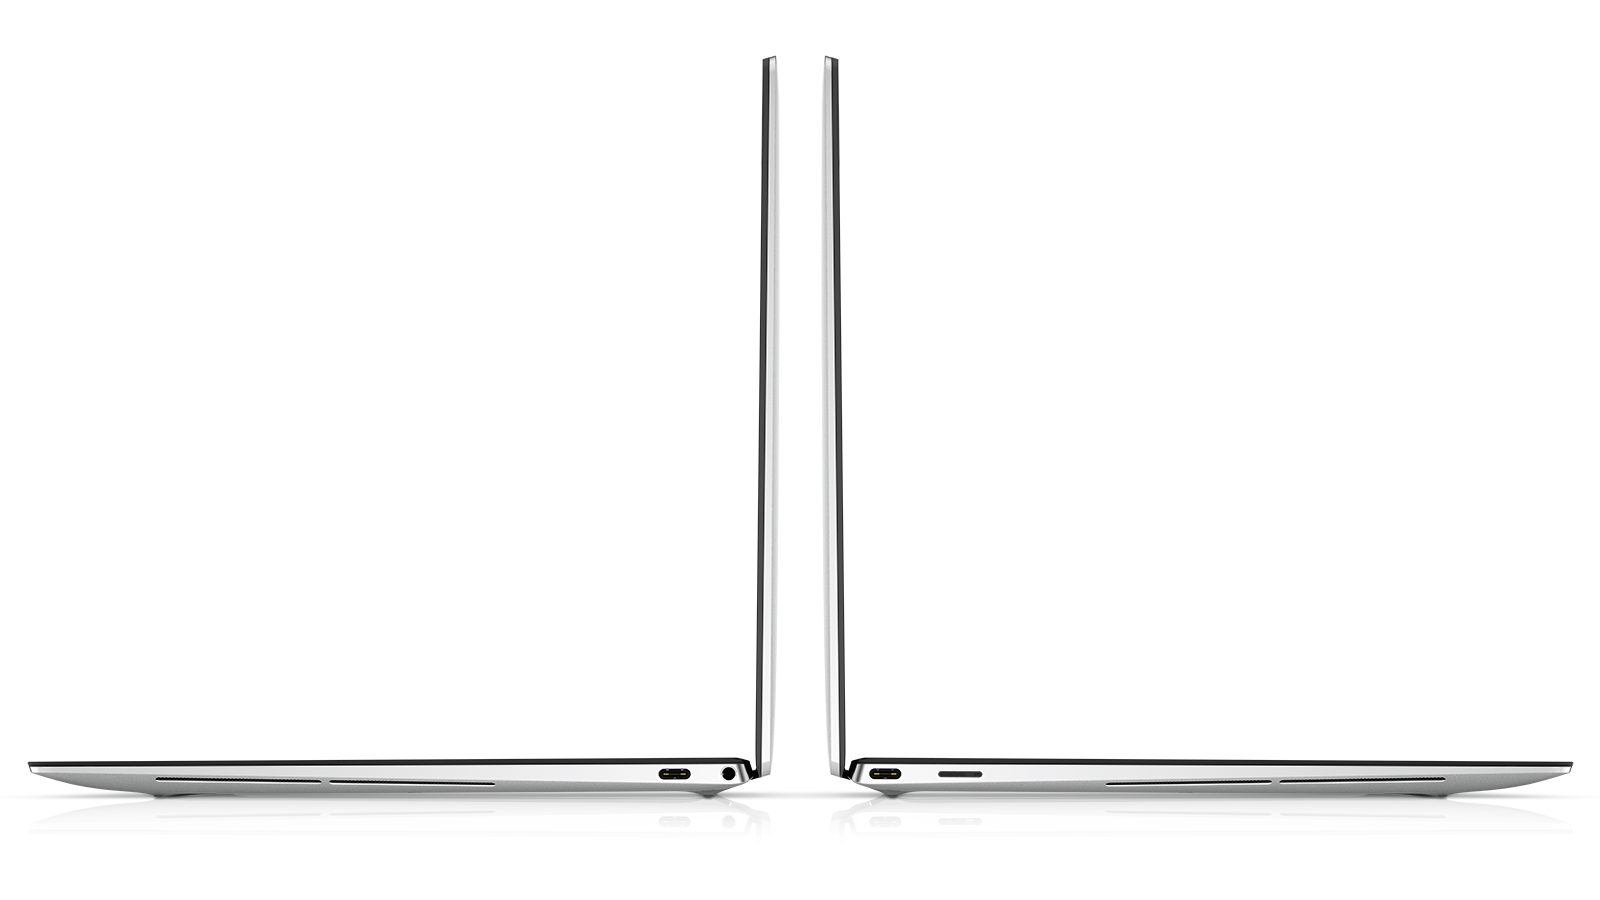 Left-side and right-side view of new Dell XPS 13 laptop, with view of ports and 3.5mm headphone jack